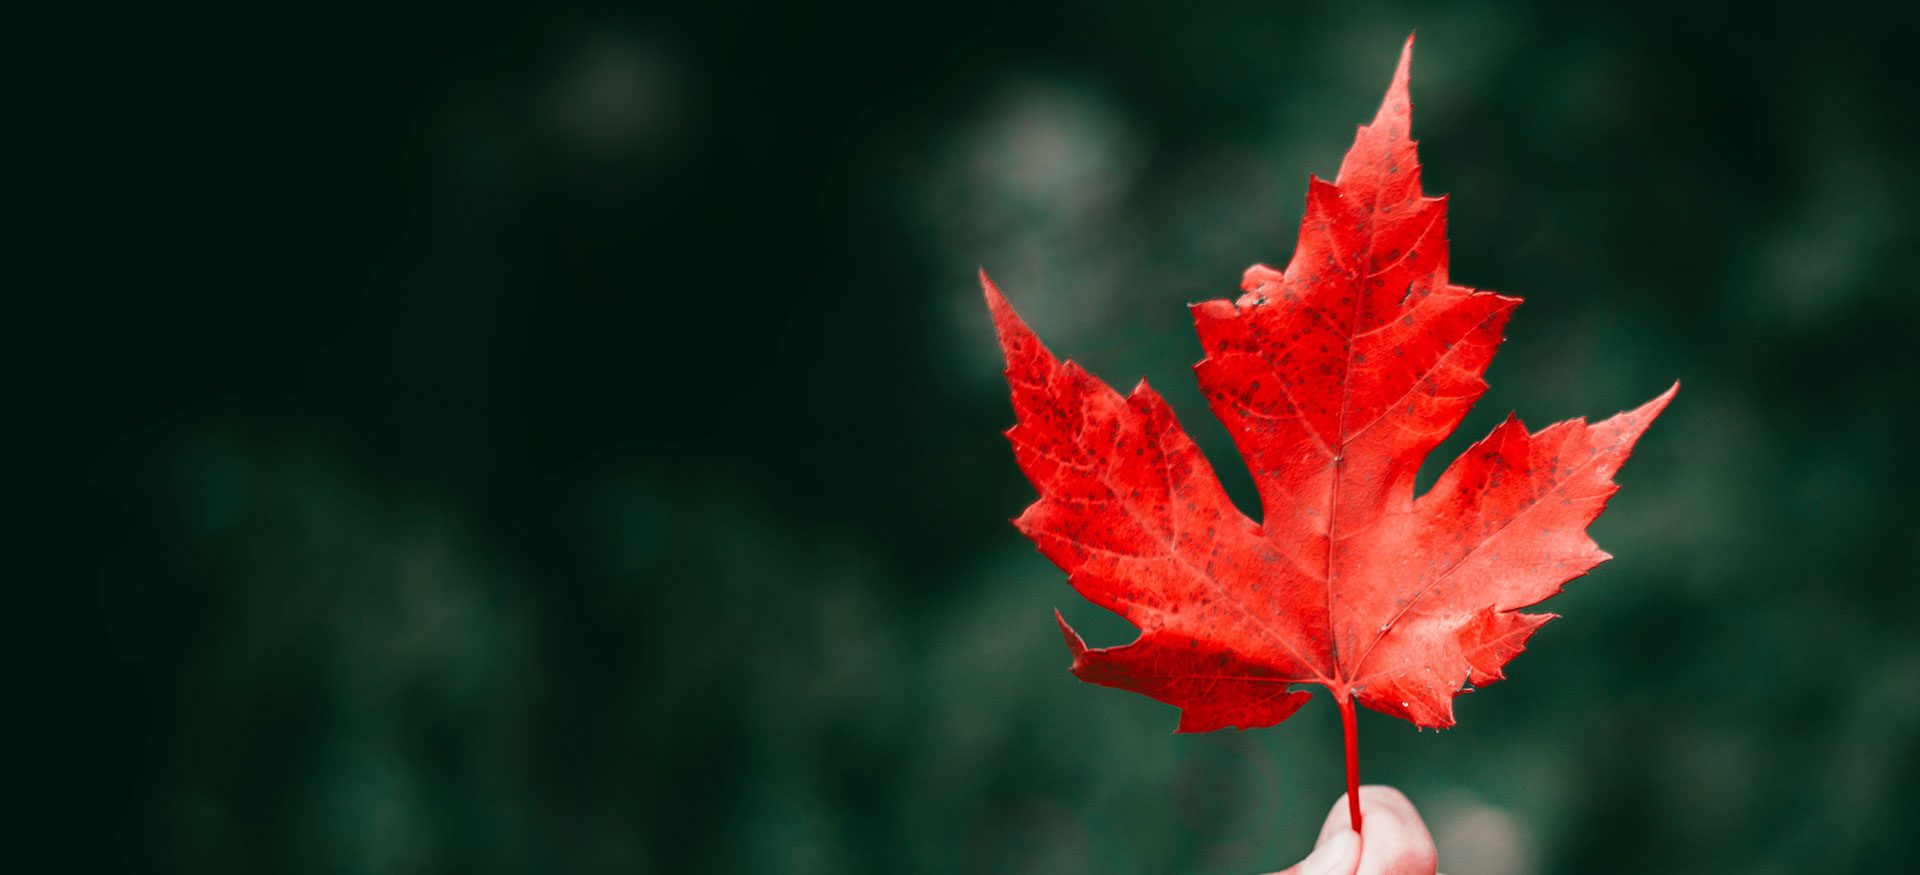 A red leaf is shown in front of green background.